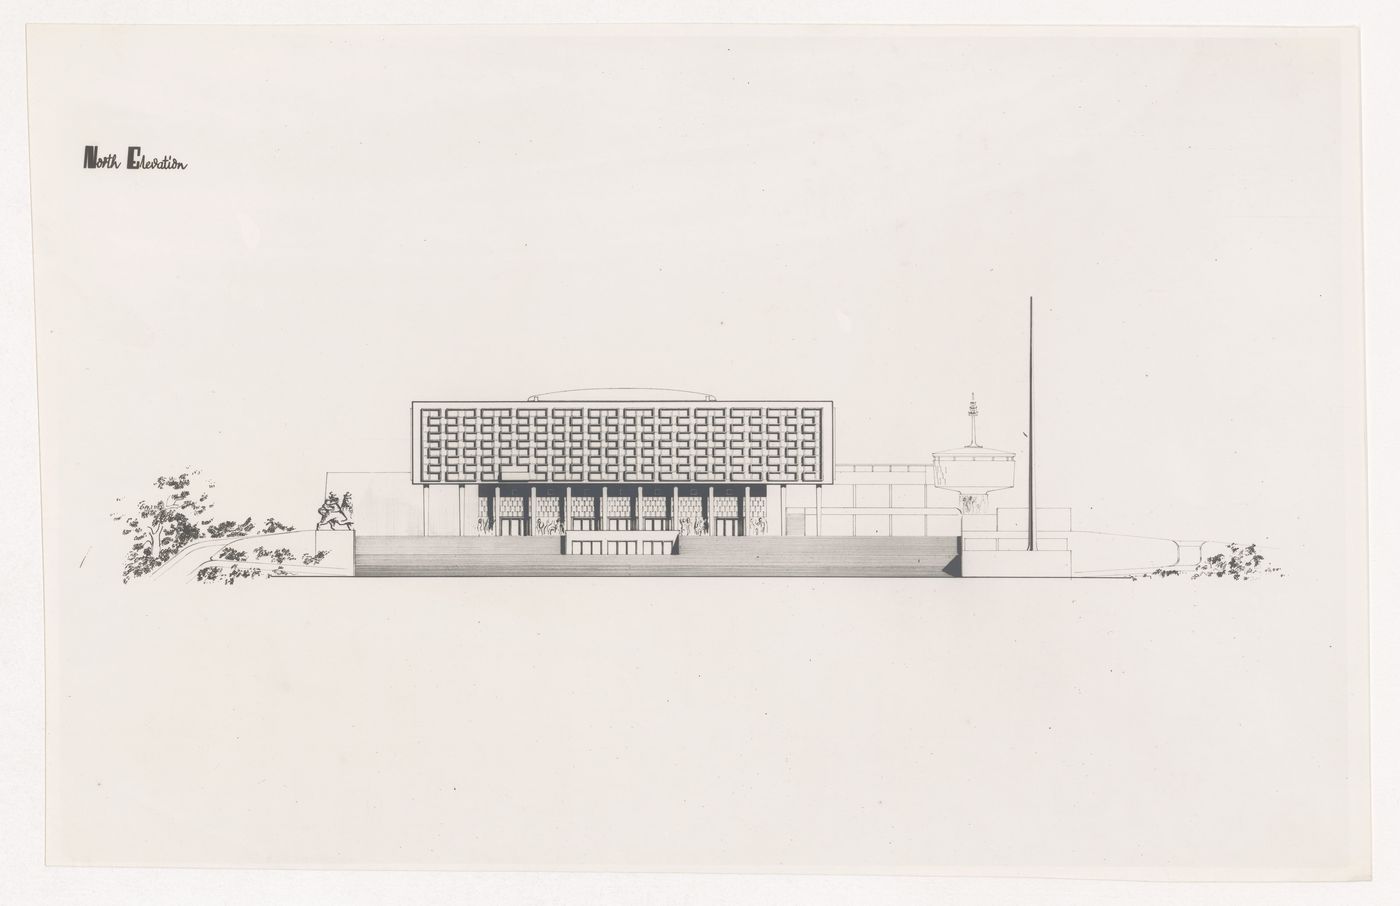 North elevation for Government House, Addis Ababa, Ethiopia